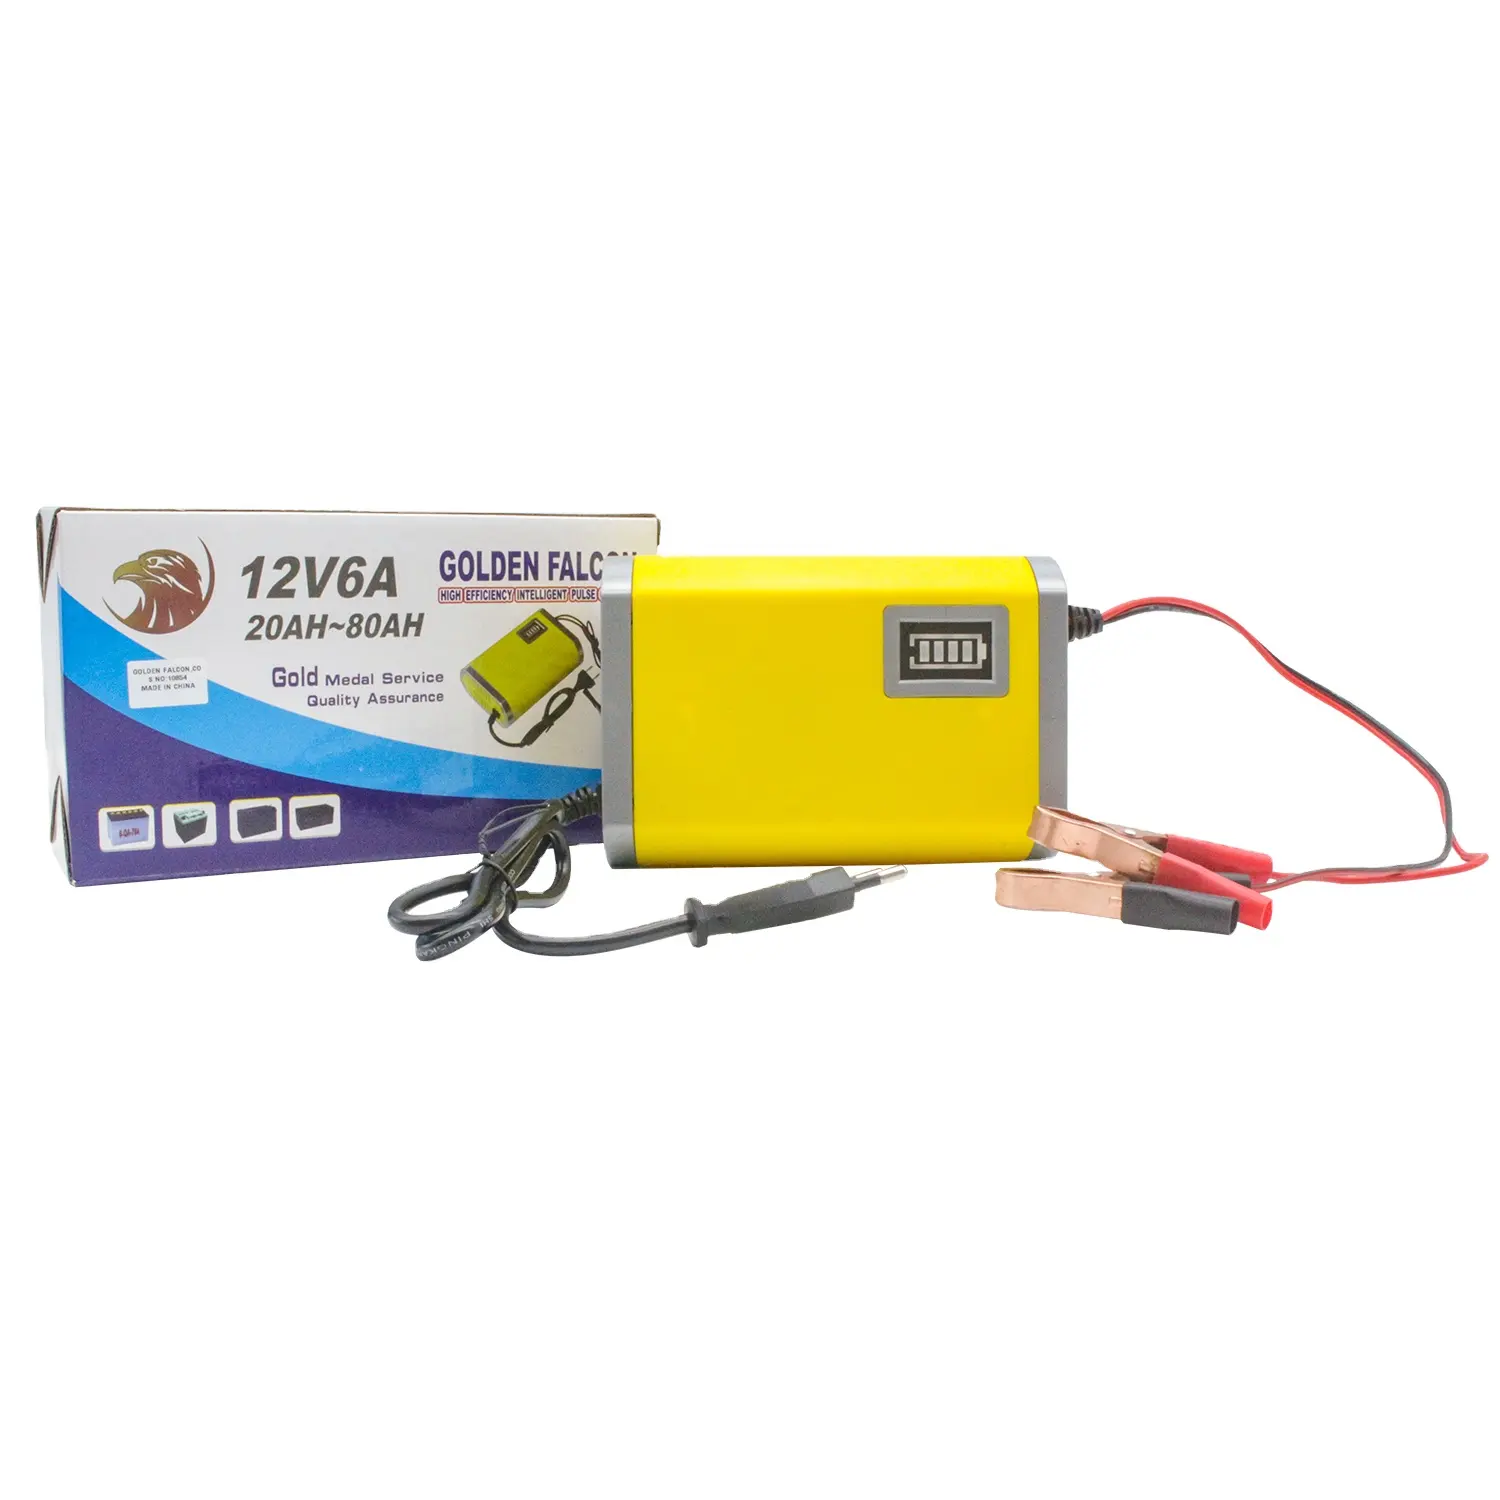 Universal Fast Charging 12v 6A lead acid battery charger circuit